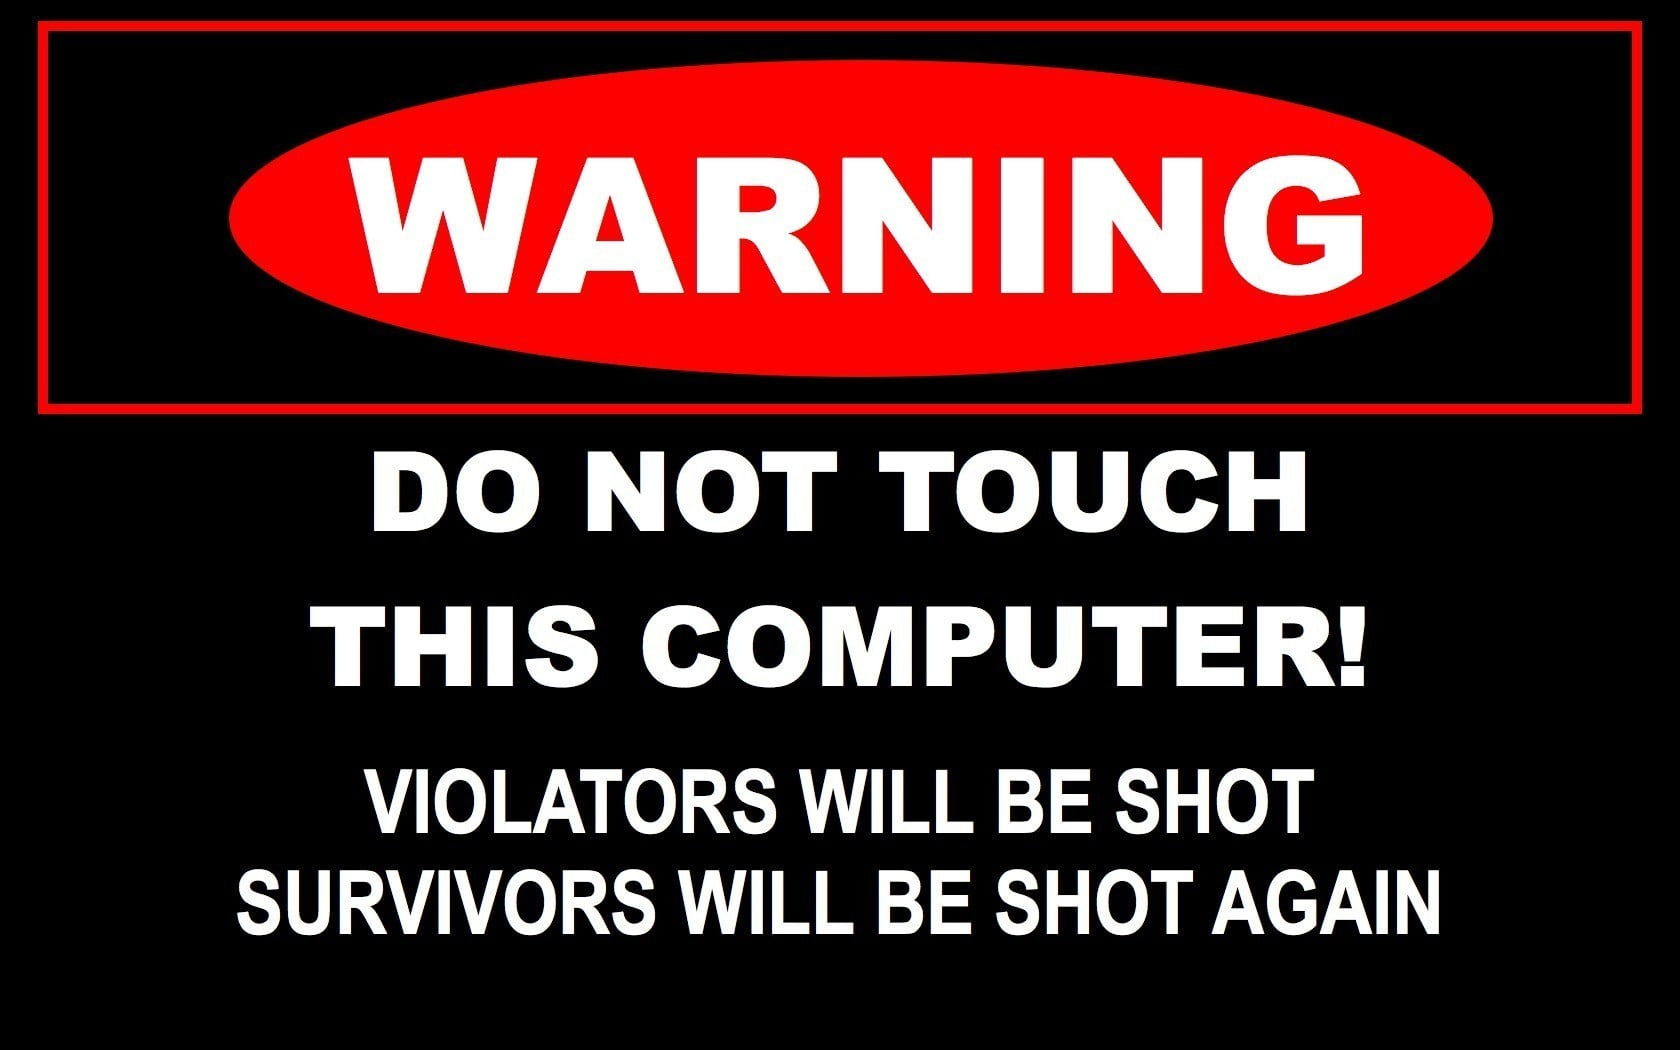 WARNING do not touch this computer signage